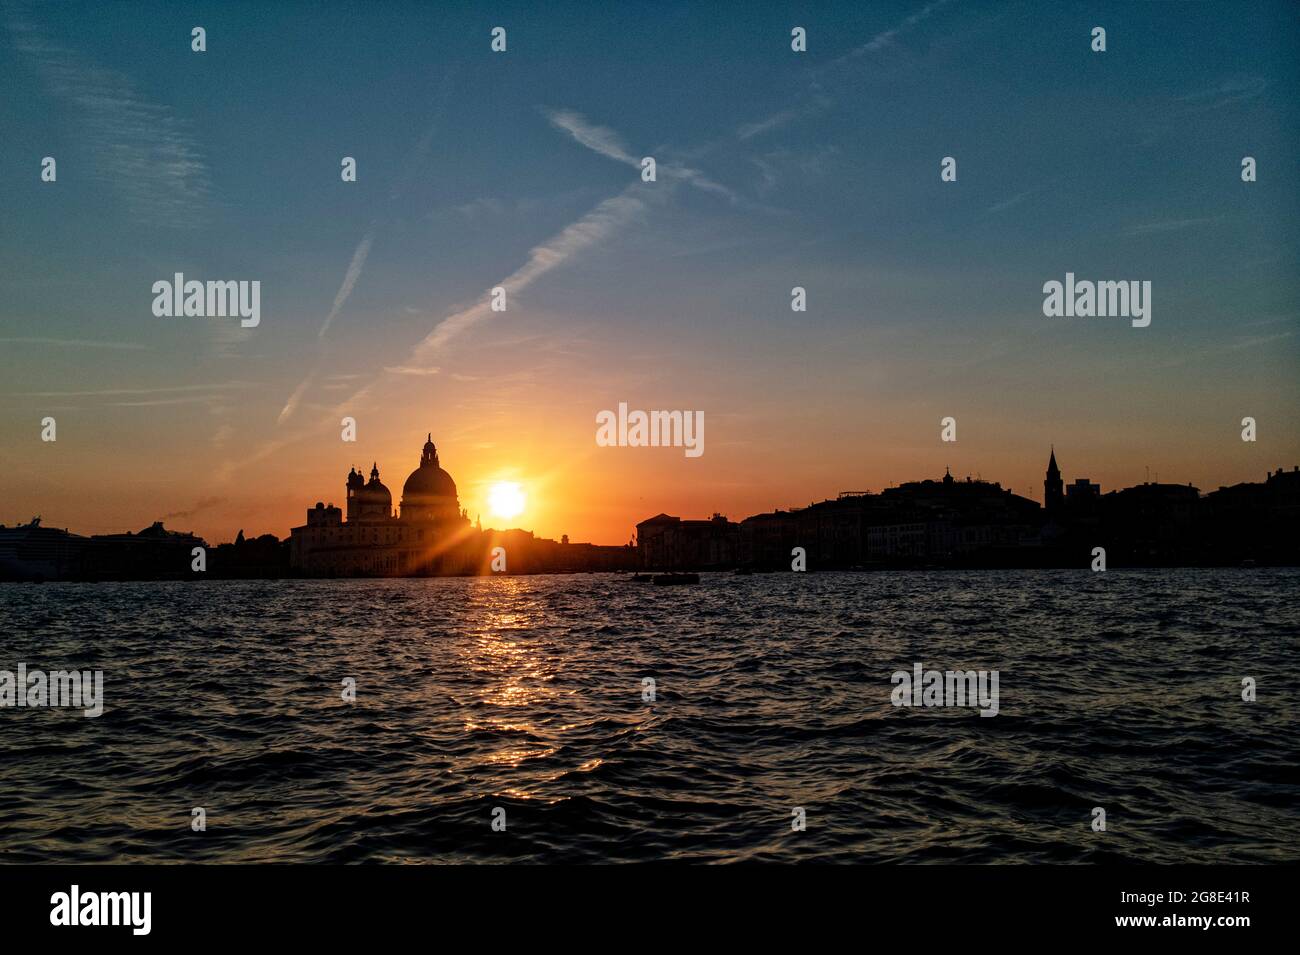 Europe - Italy, Venice: A view of the famous city of Venice which was built on more than 100 small islands in a lagoon in the Adriatic Sea. Stock Photo